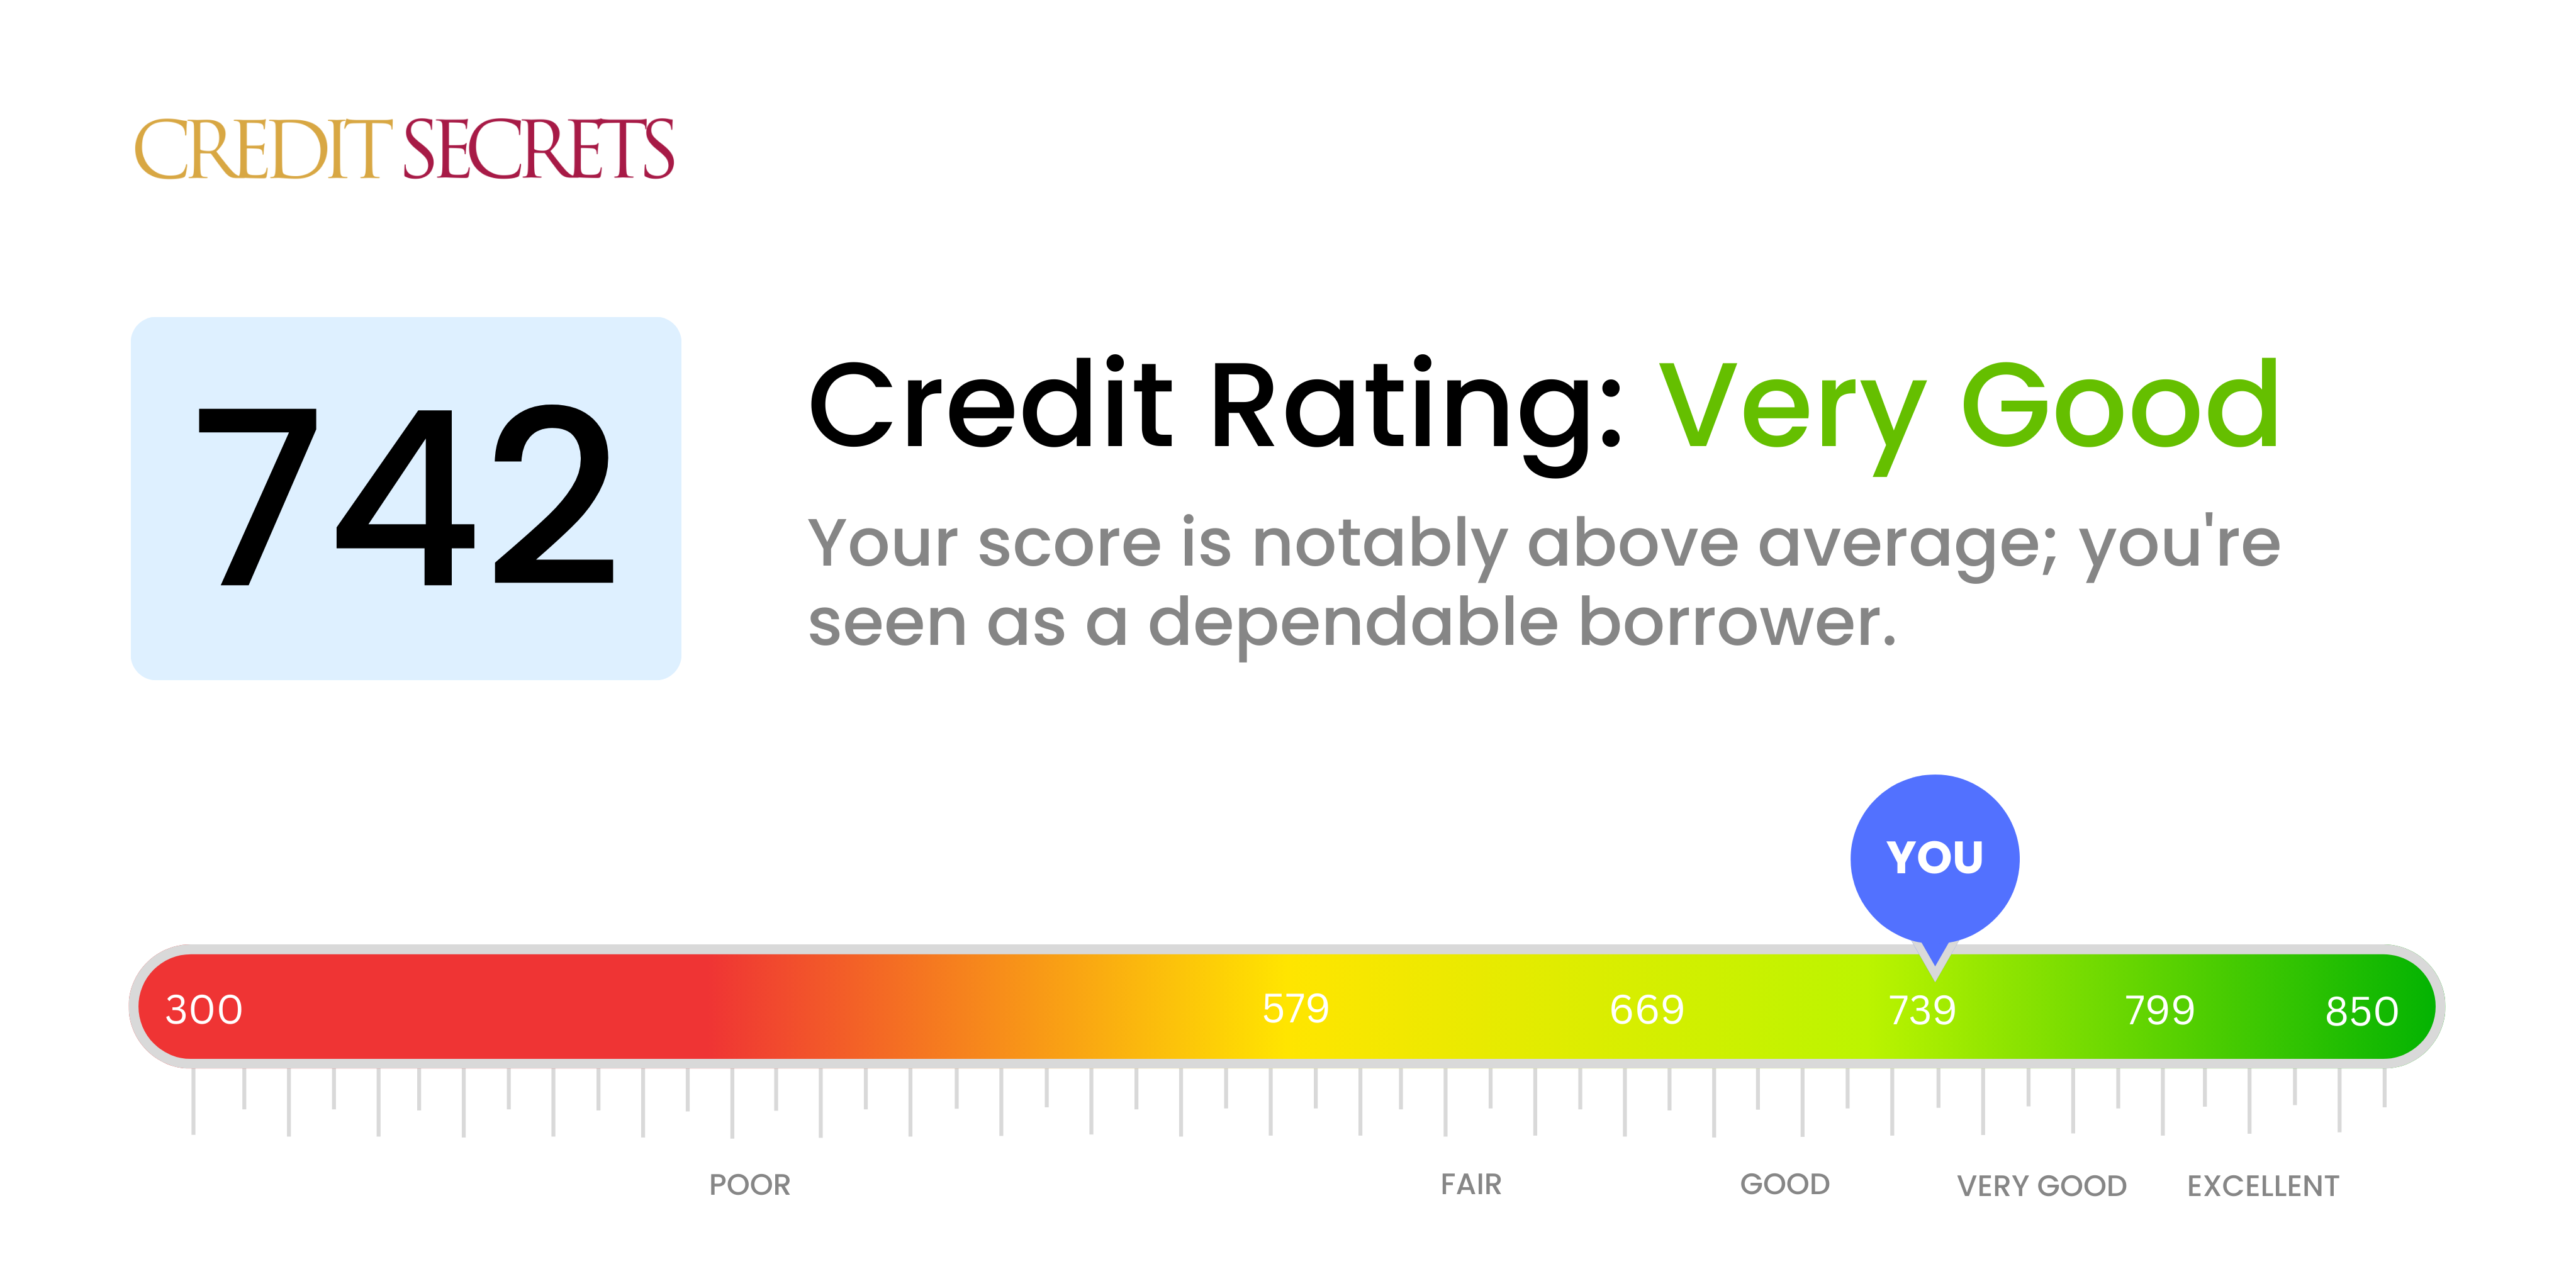 Is 742 a good credit score?